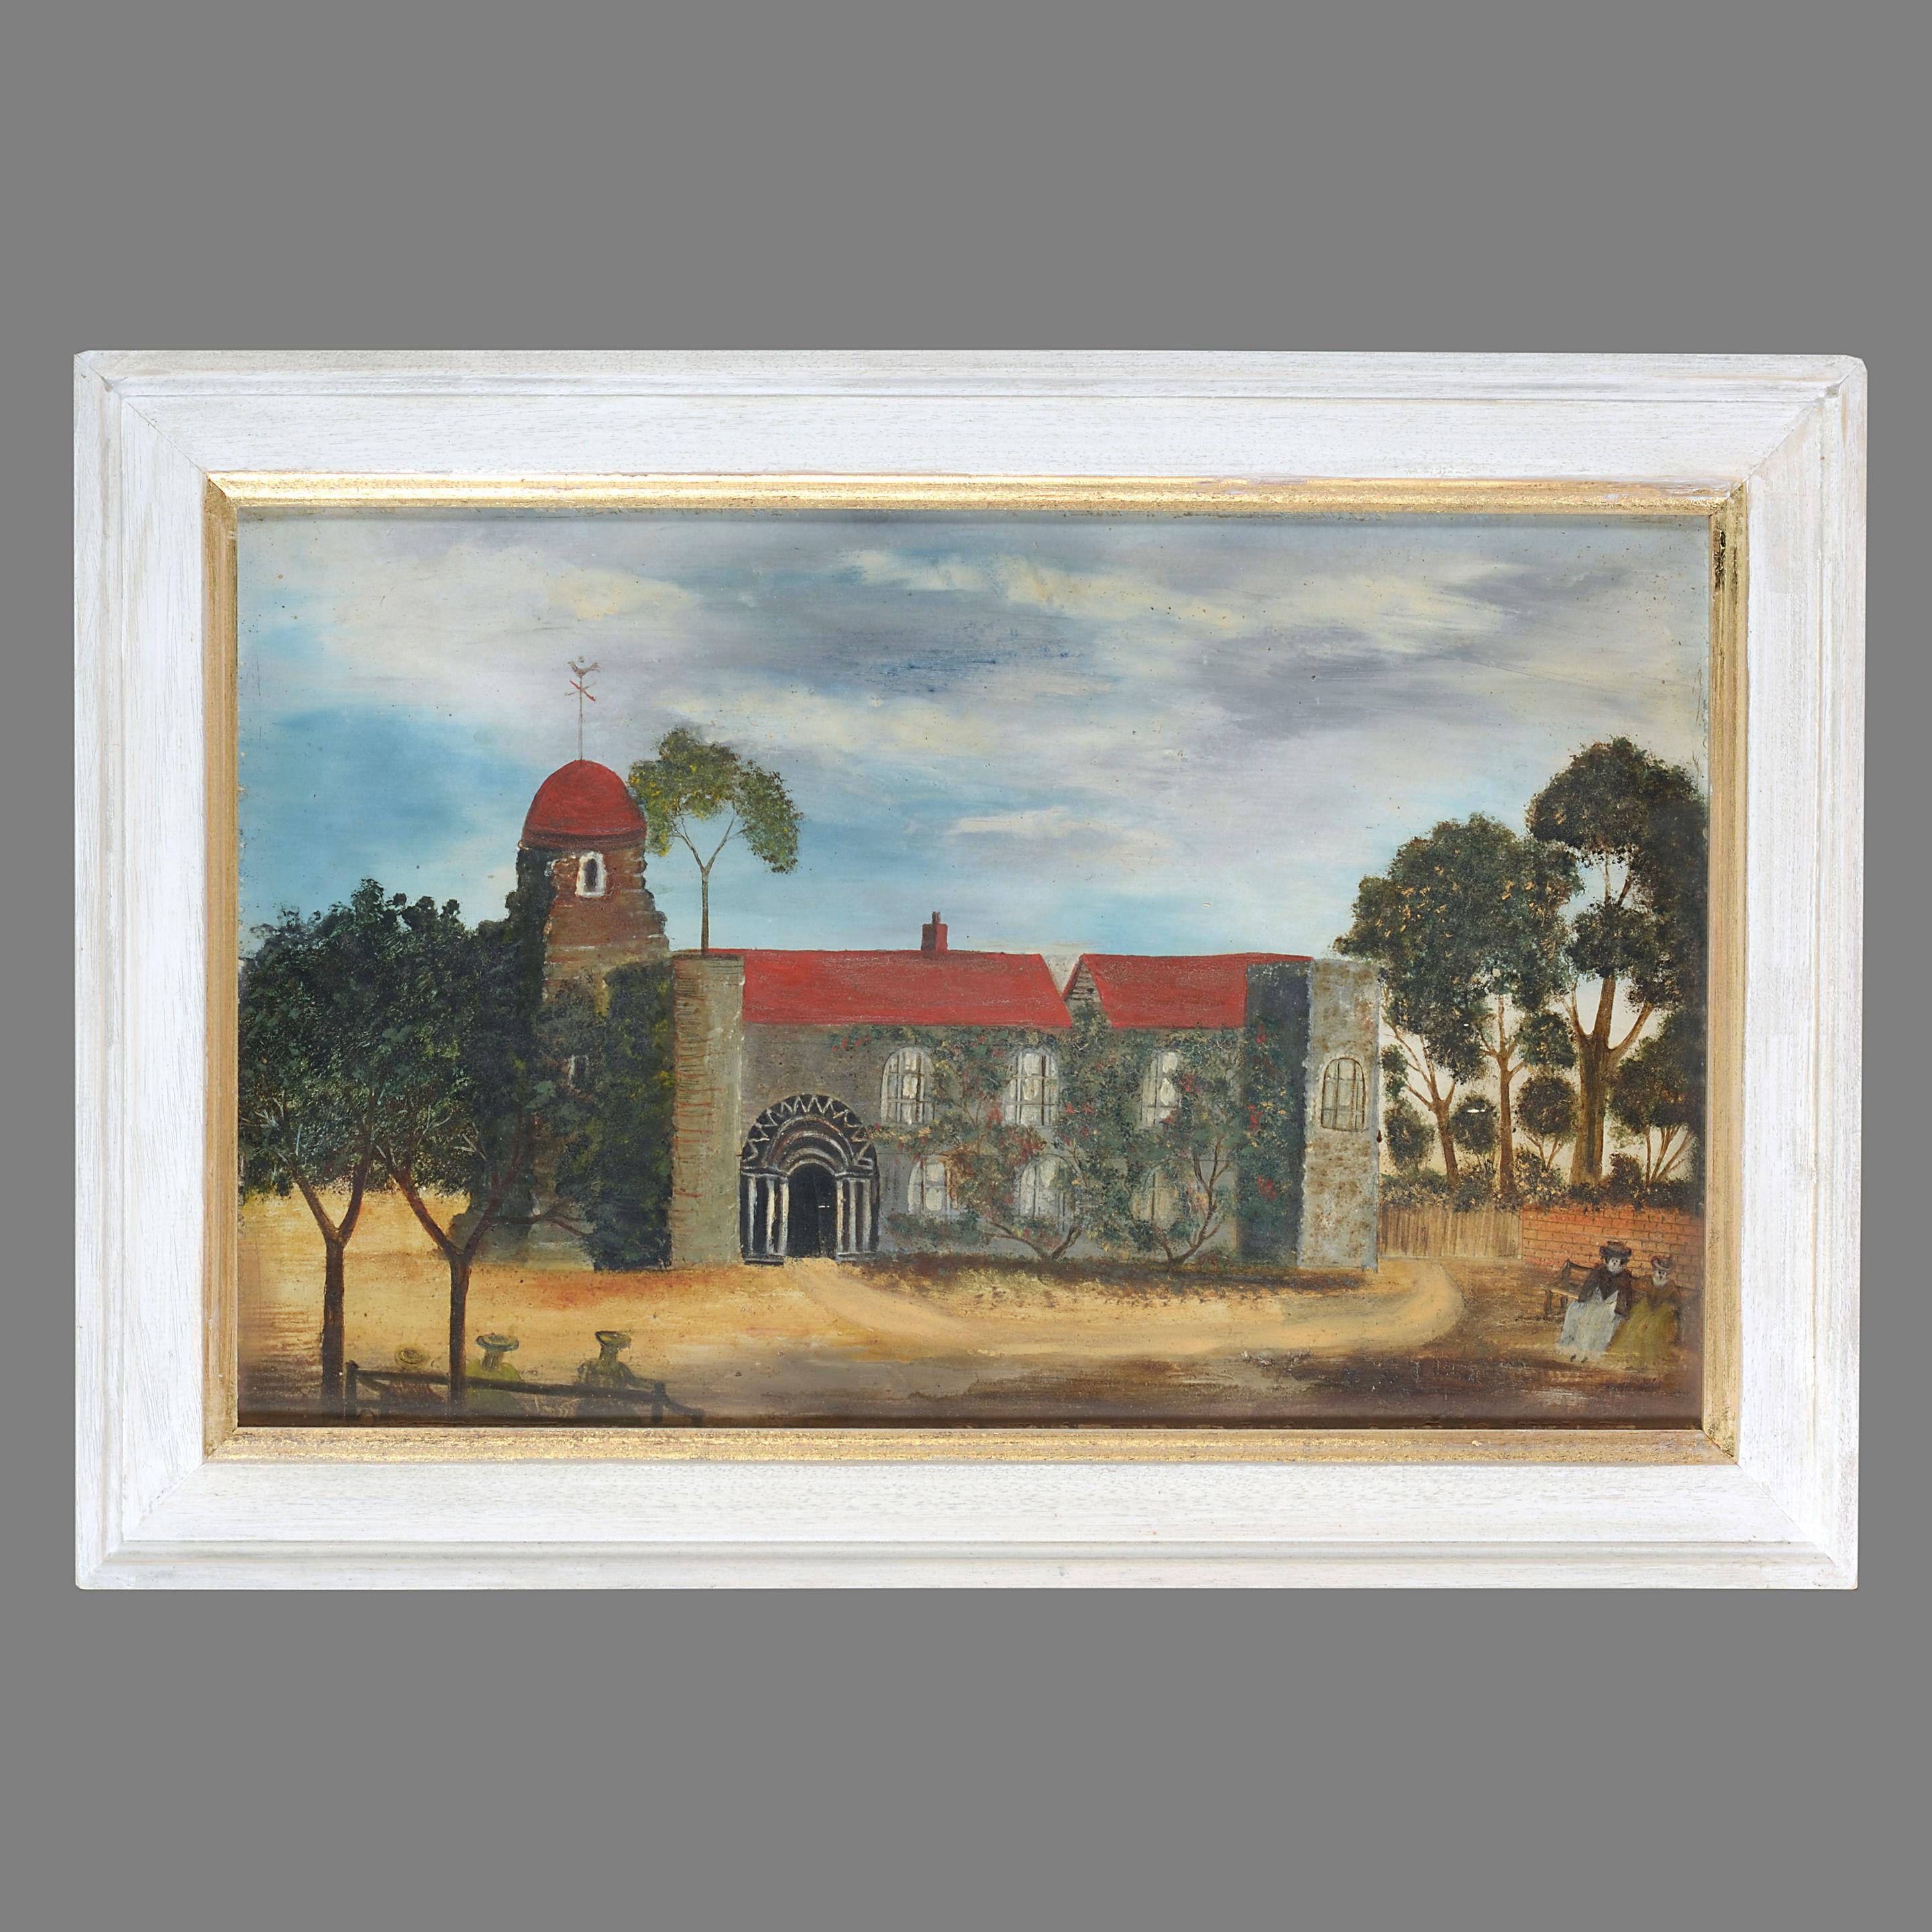 A charming pair of late 19th century naive landscapes, depicting figures by ancient buildings in Essex, one depicting the old Colchester Castle. Set in painted parcel gilded frames. 

Oils on panels. 

Dimensions refer to size of frames.